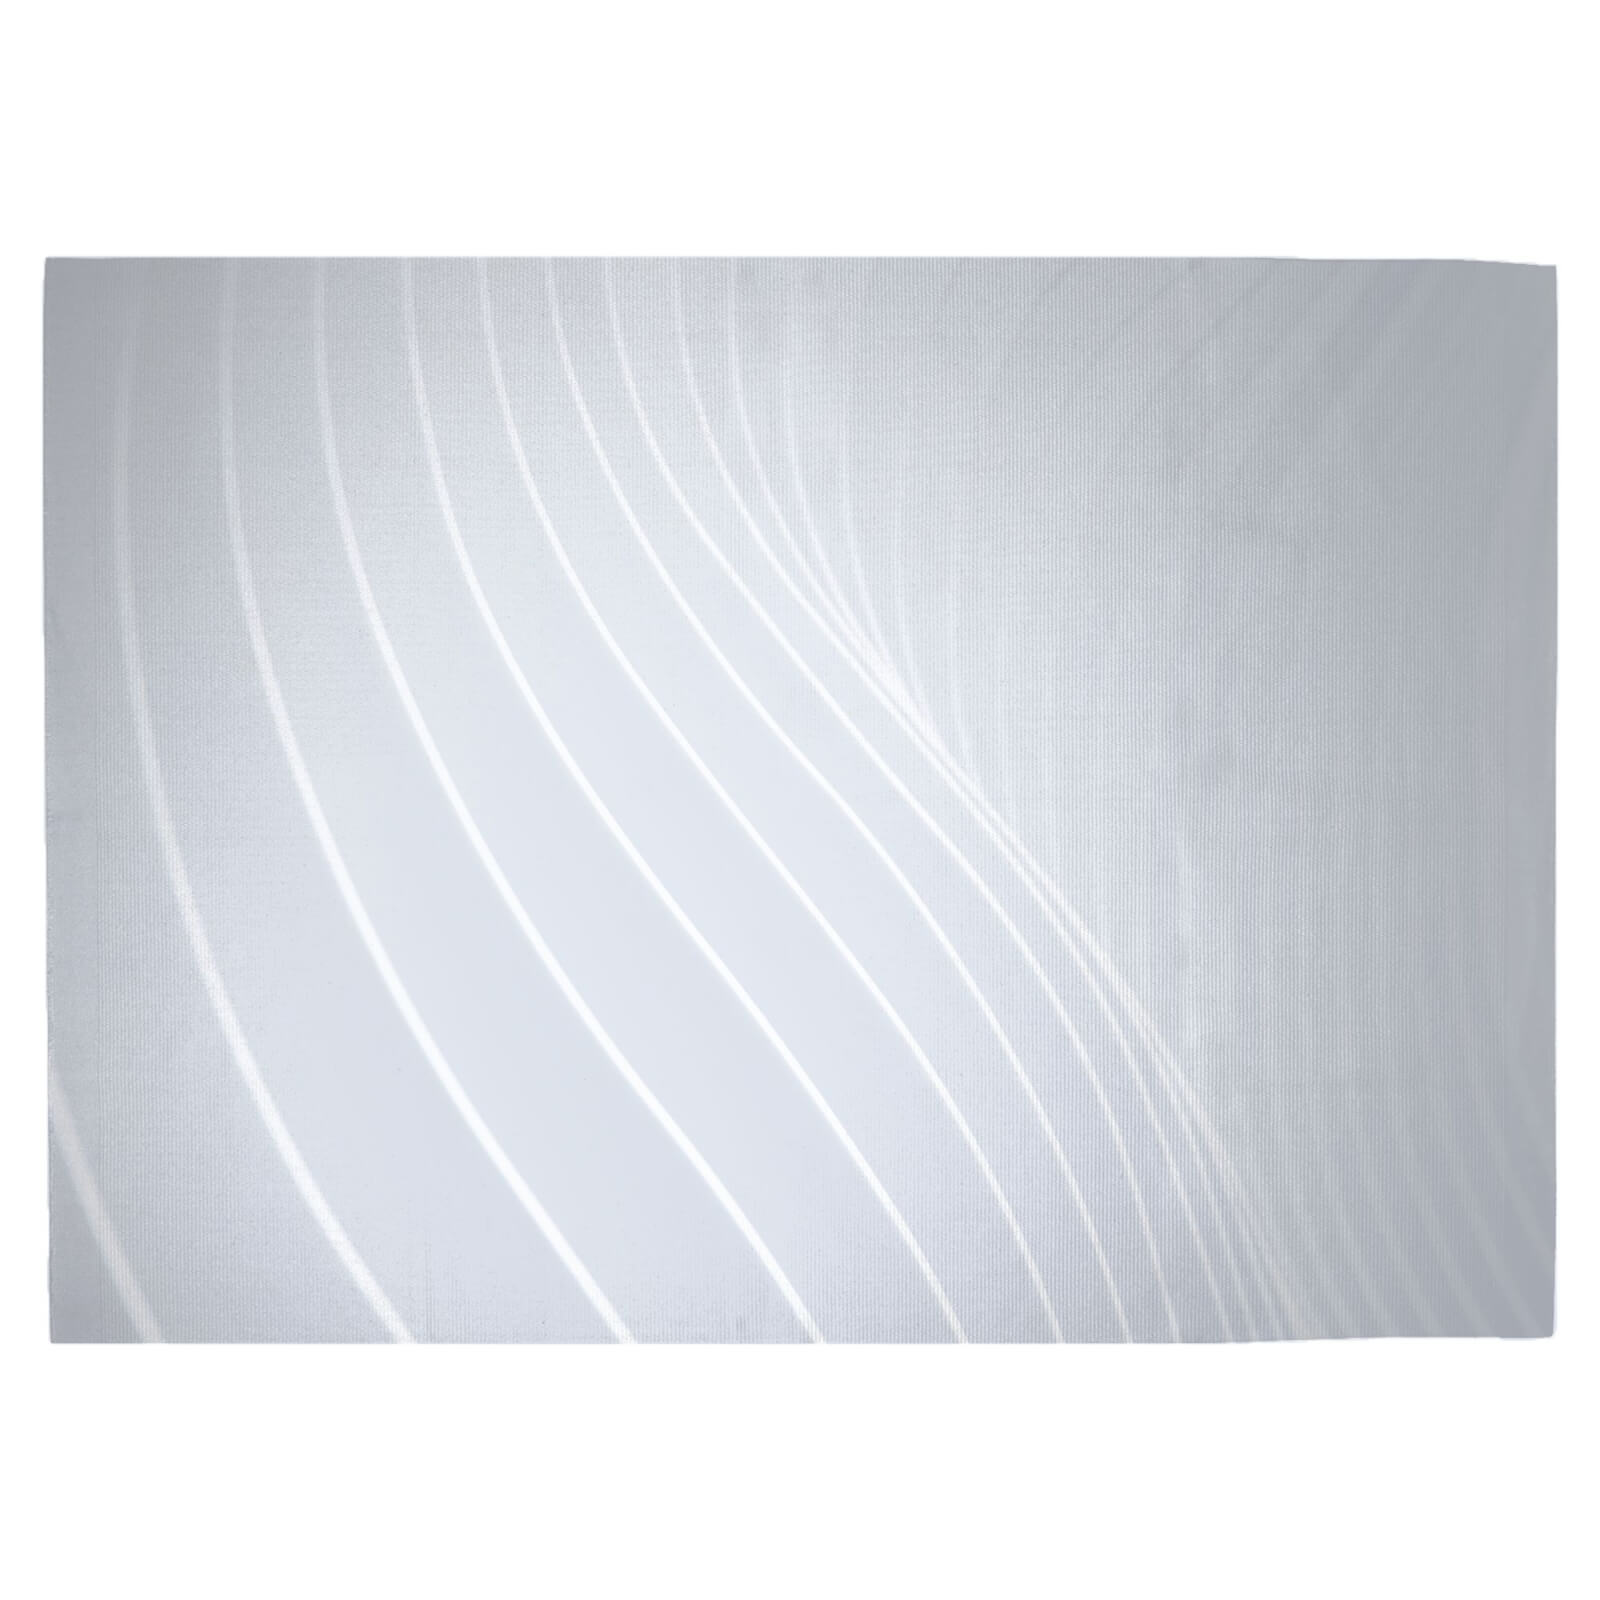 White Lines Woven Rug - Large